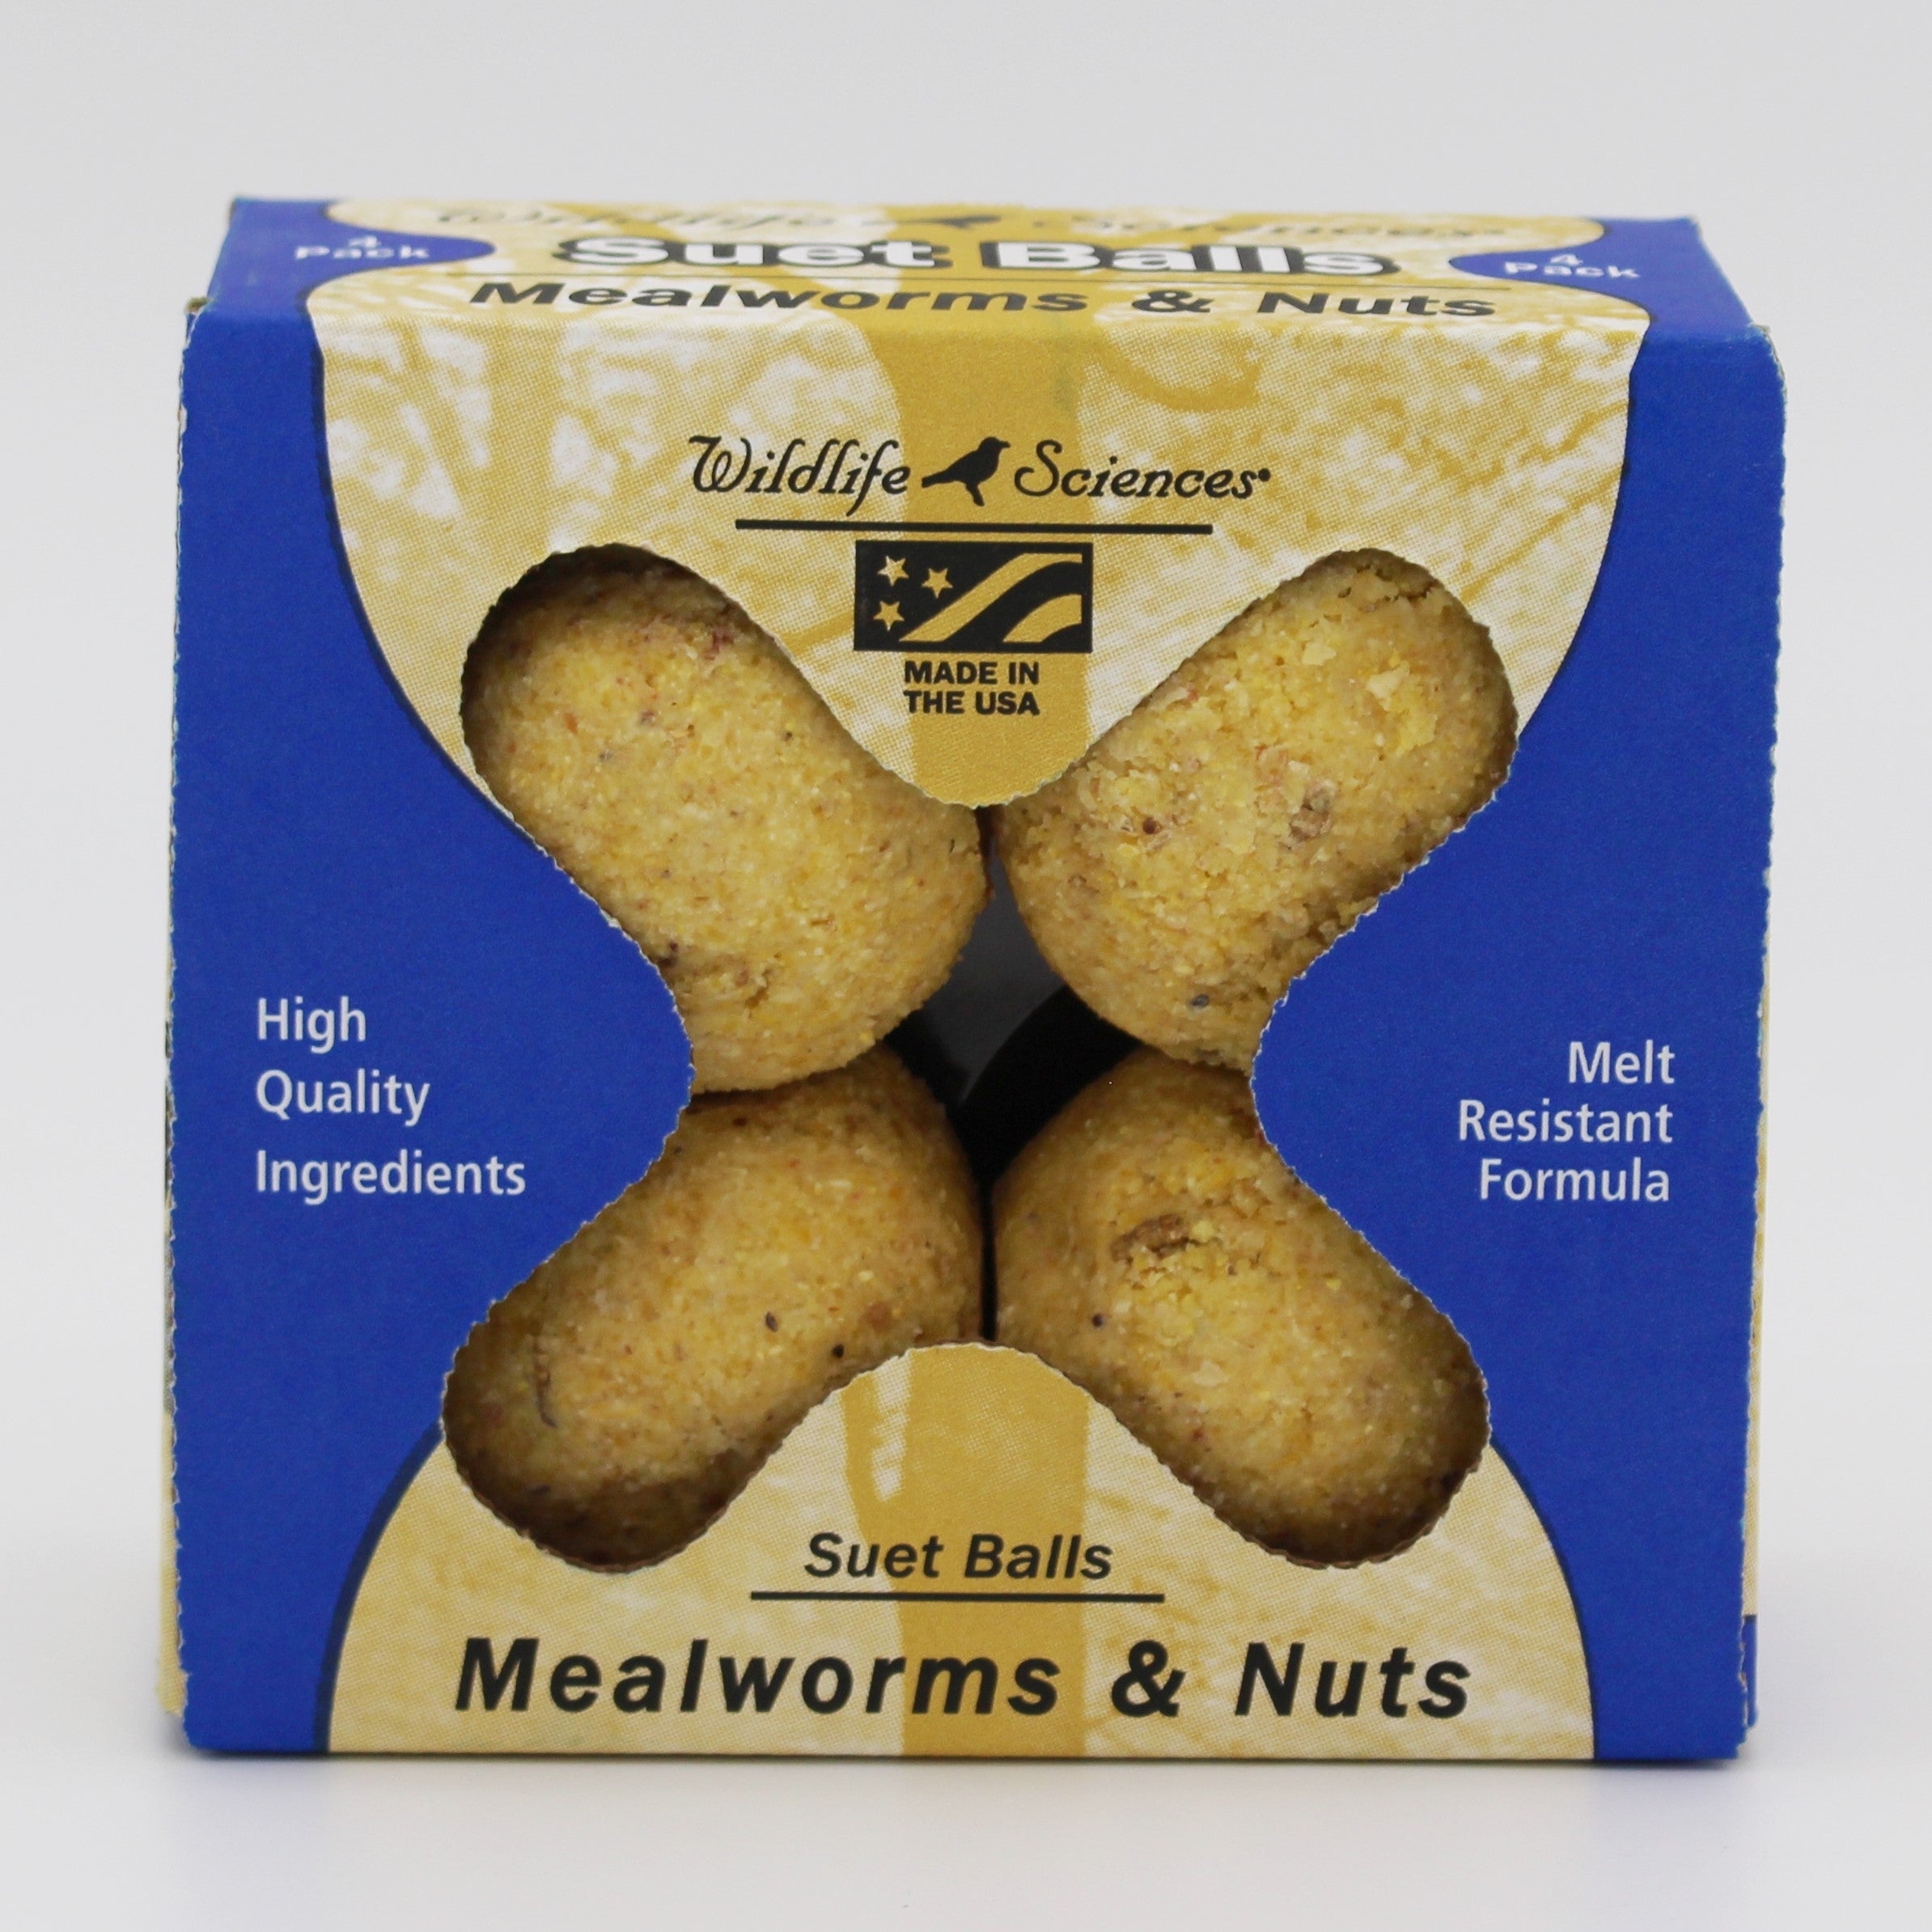 Insects & Nuts 4 Pack Suet Balls Wildlife Sciences